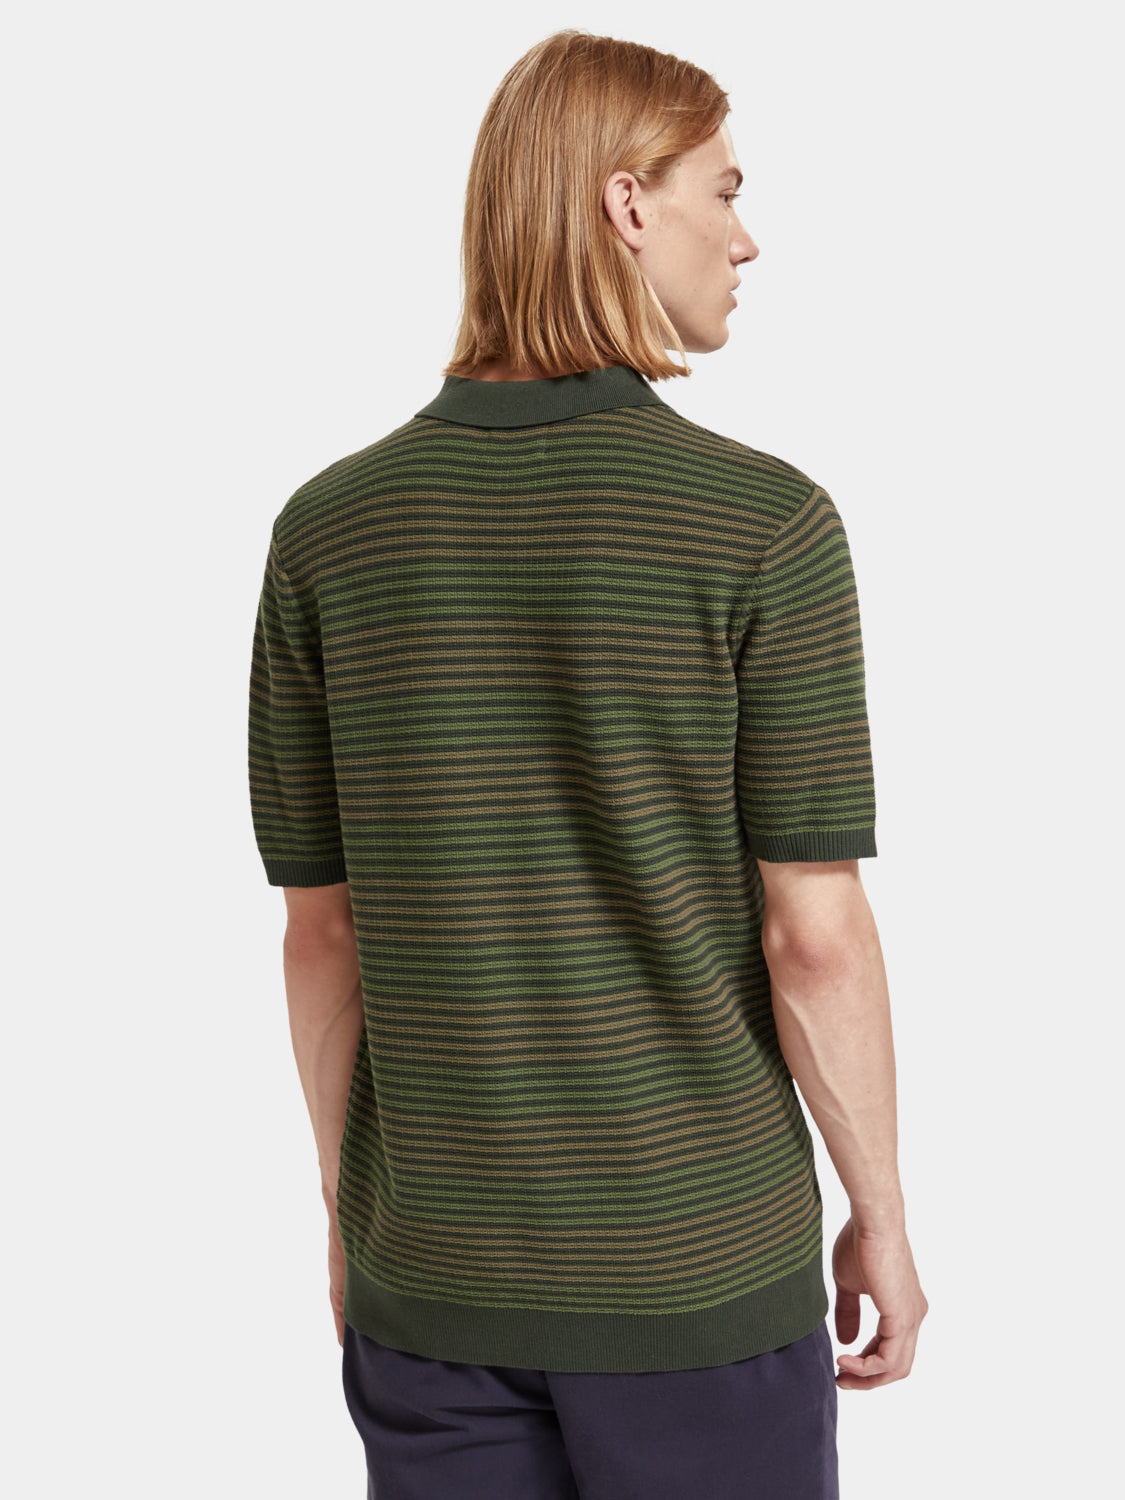 Knitted striped polo shirt - Military Stripe